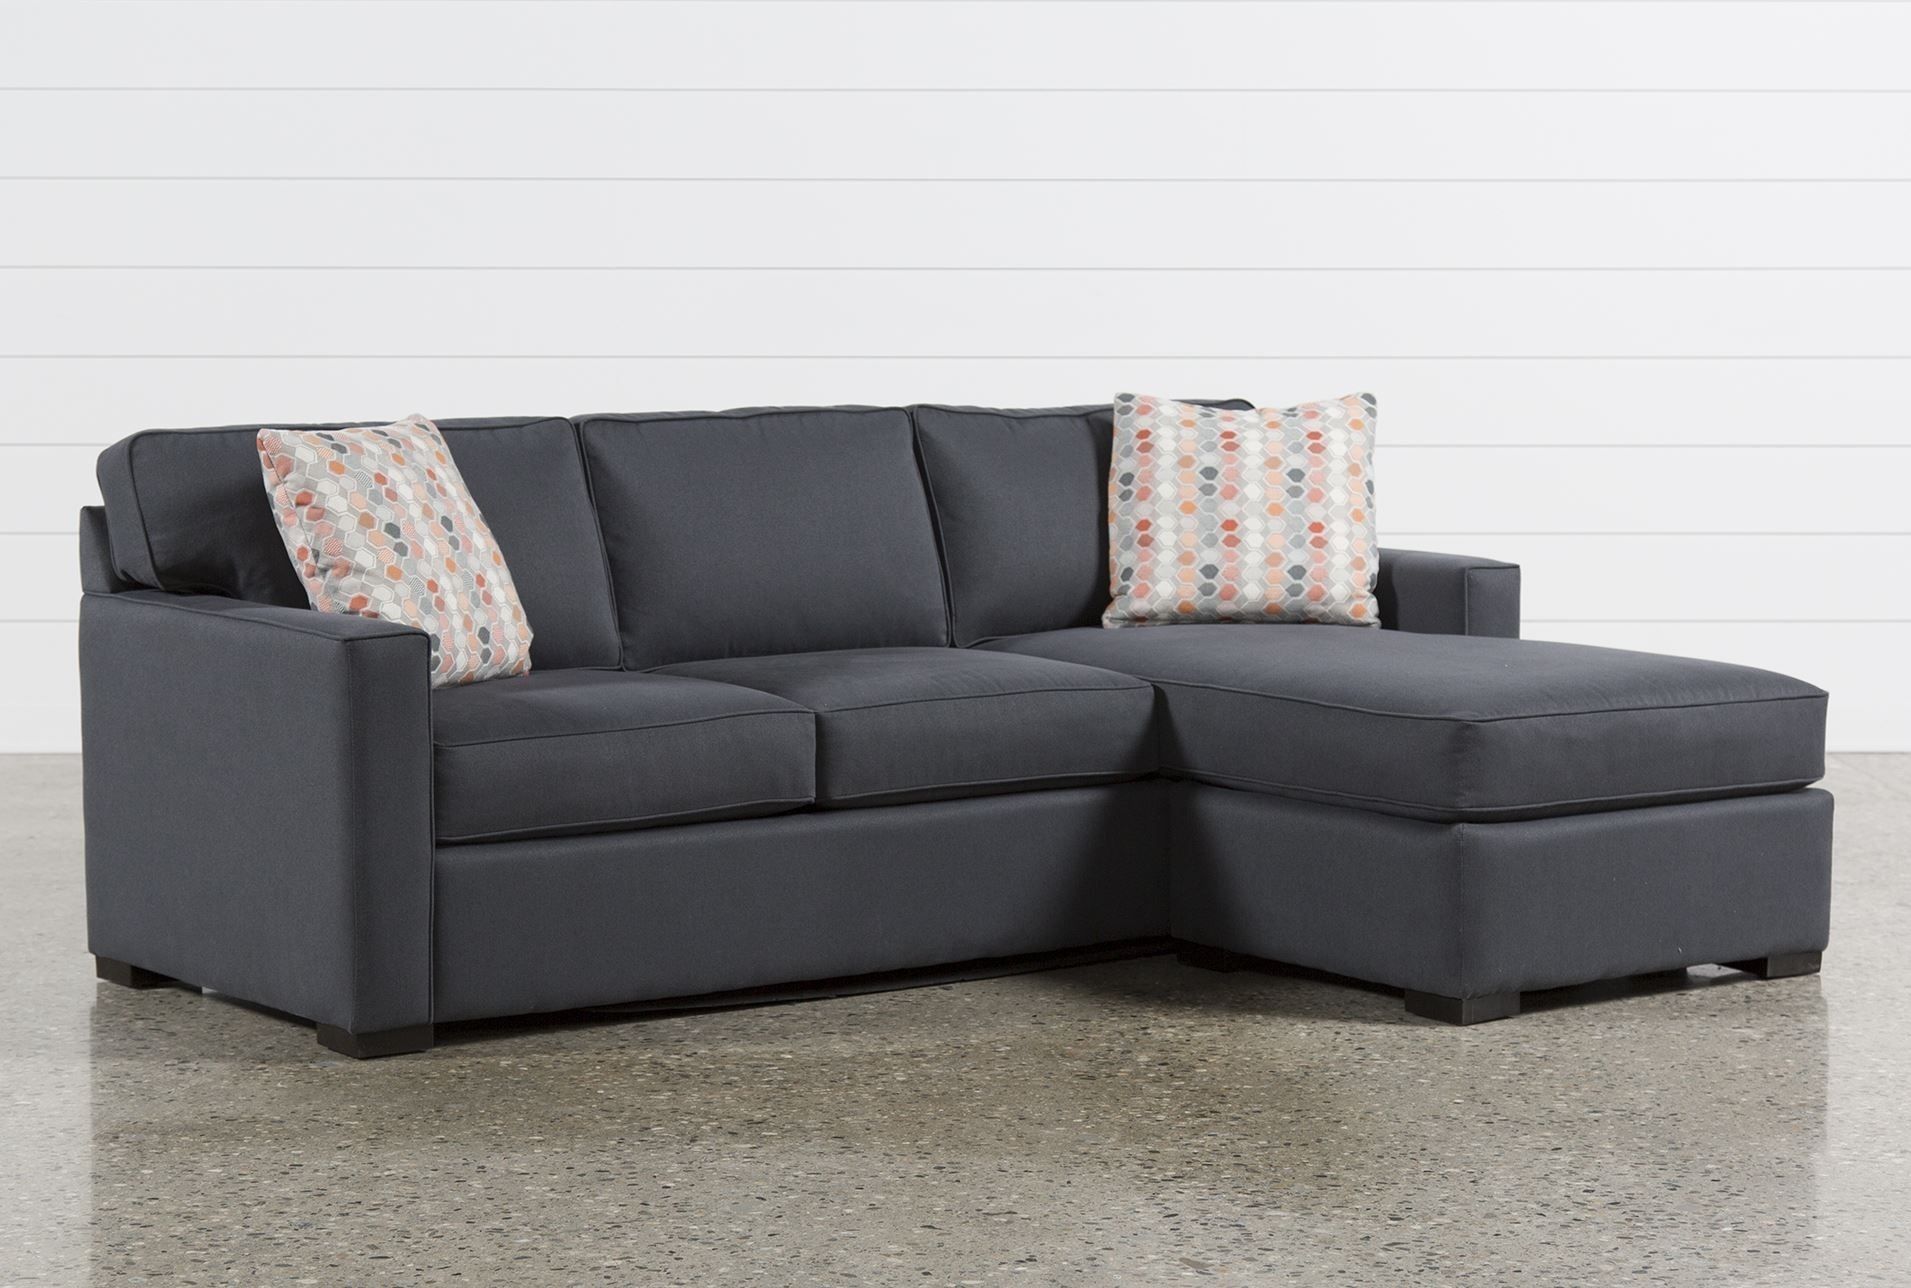 Living Spaces Sectional Cosmos Grey 2 Piece W Raf Chaise 206402 0 Regarding Cosmos Grey 2 Piece Sectionals With Raf Chaise (View 25 of 30)